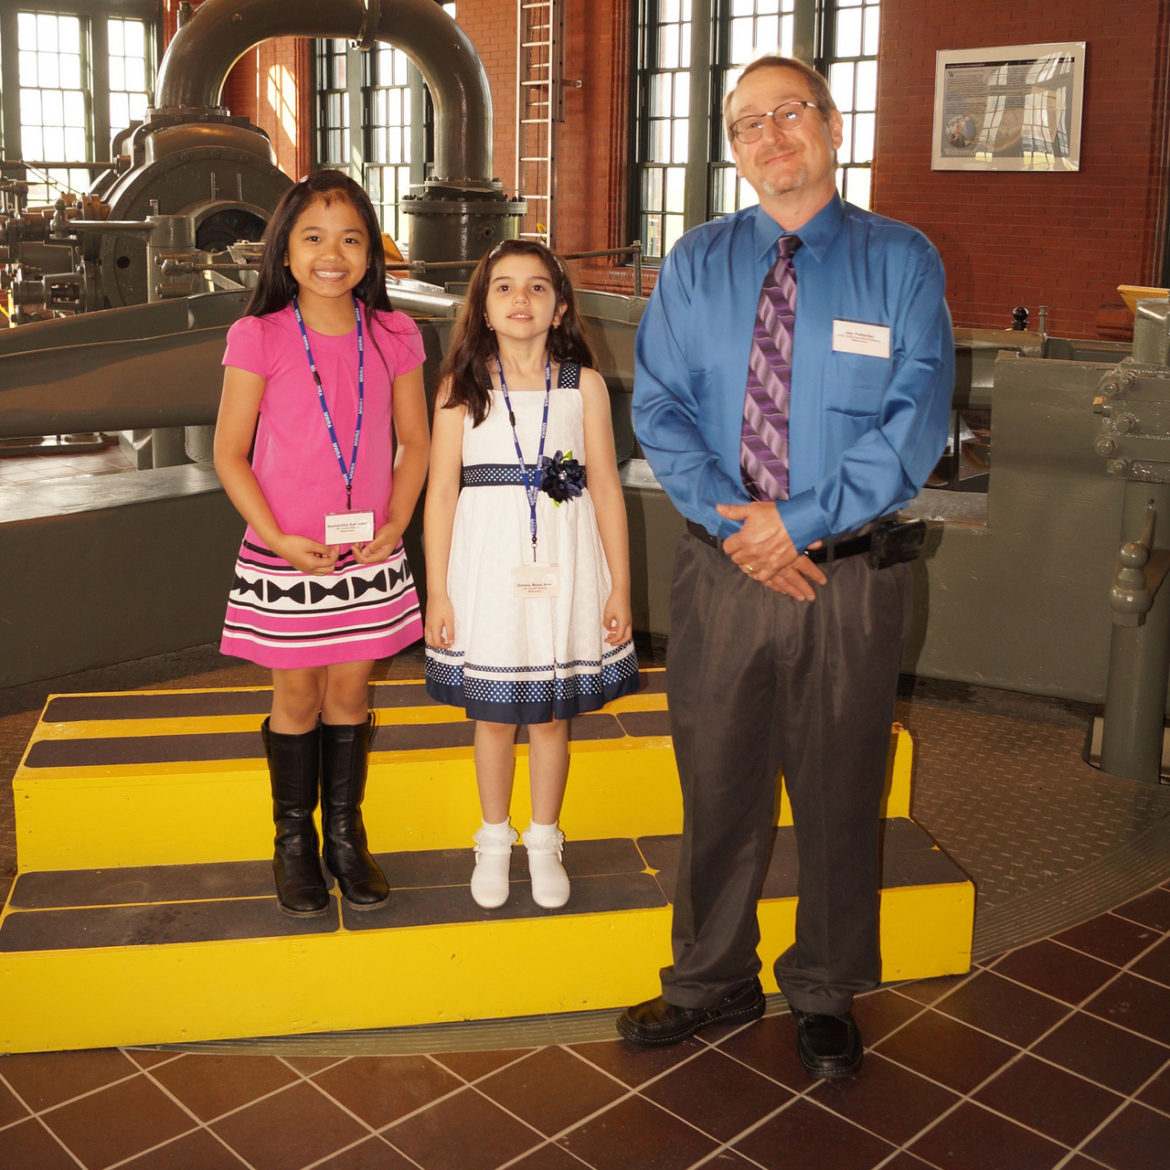 Poster contest winners Samantha Salvador and Emma Rose Noe, Town Water and Sewer Superintendent Jay Pelletier.